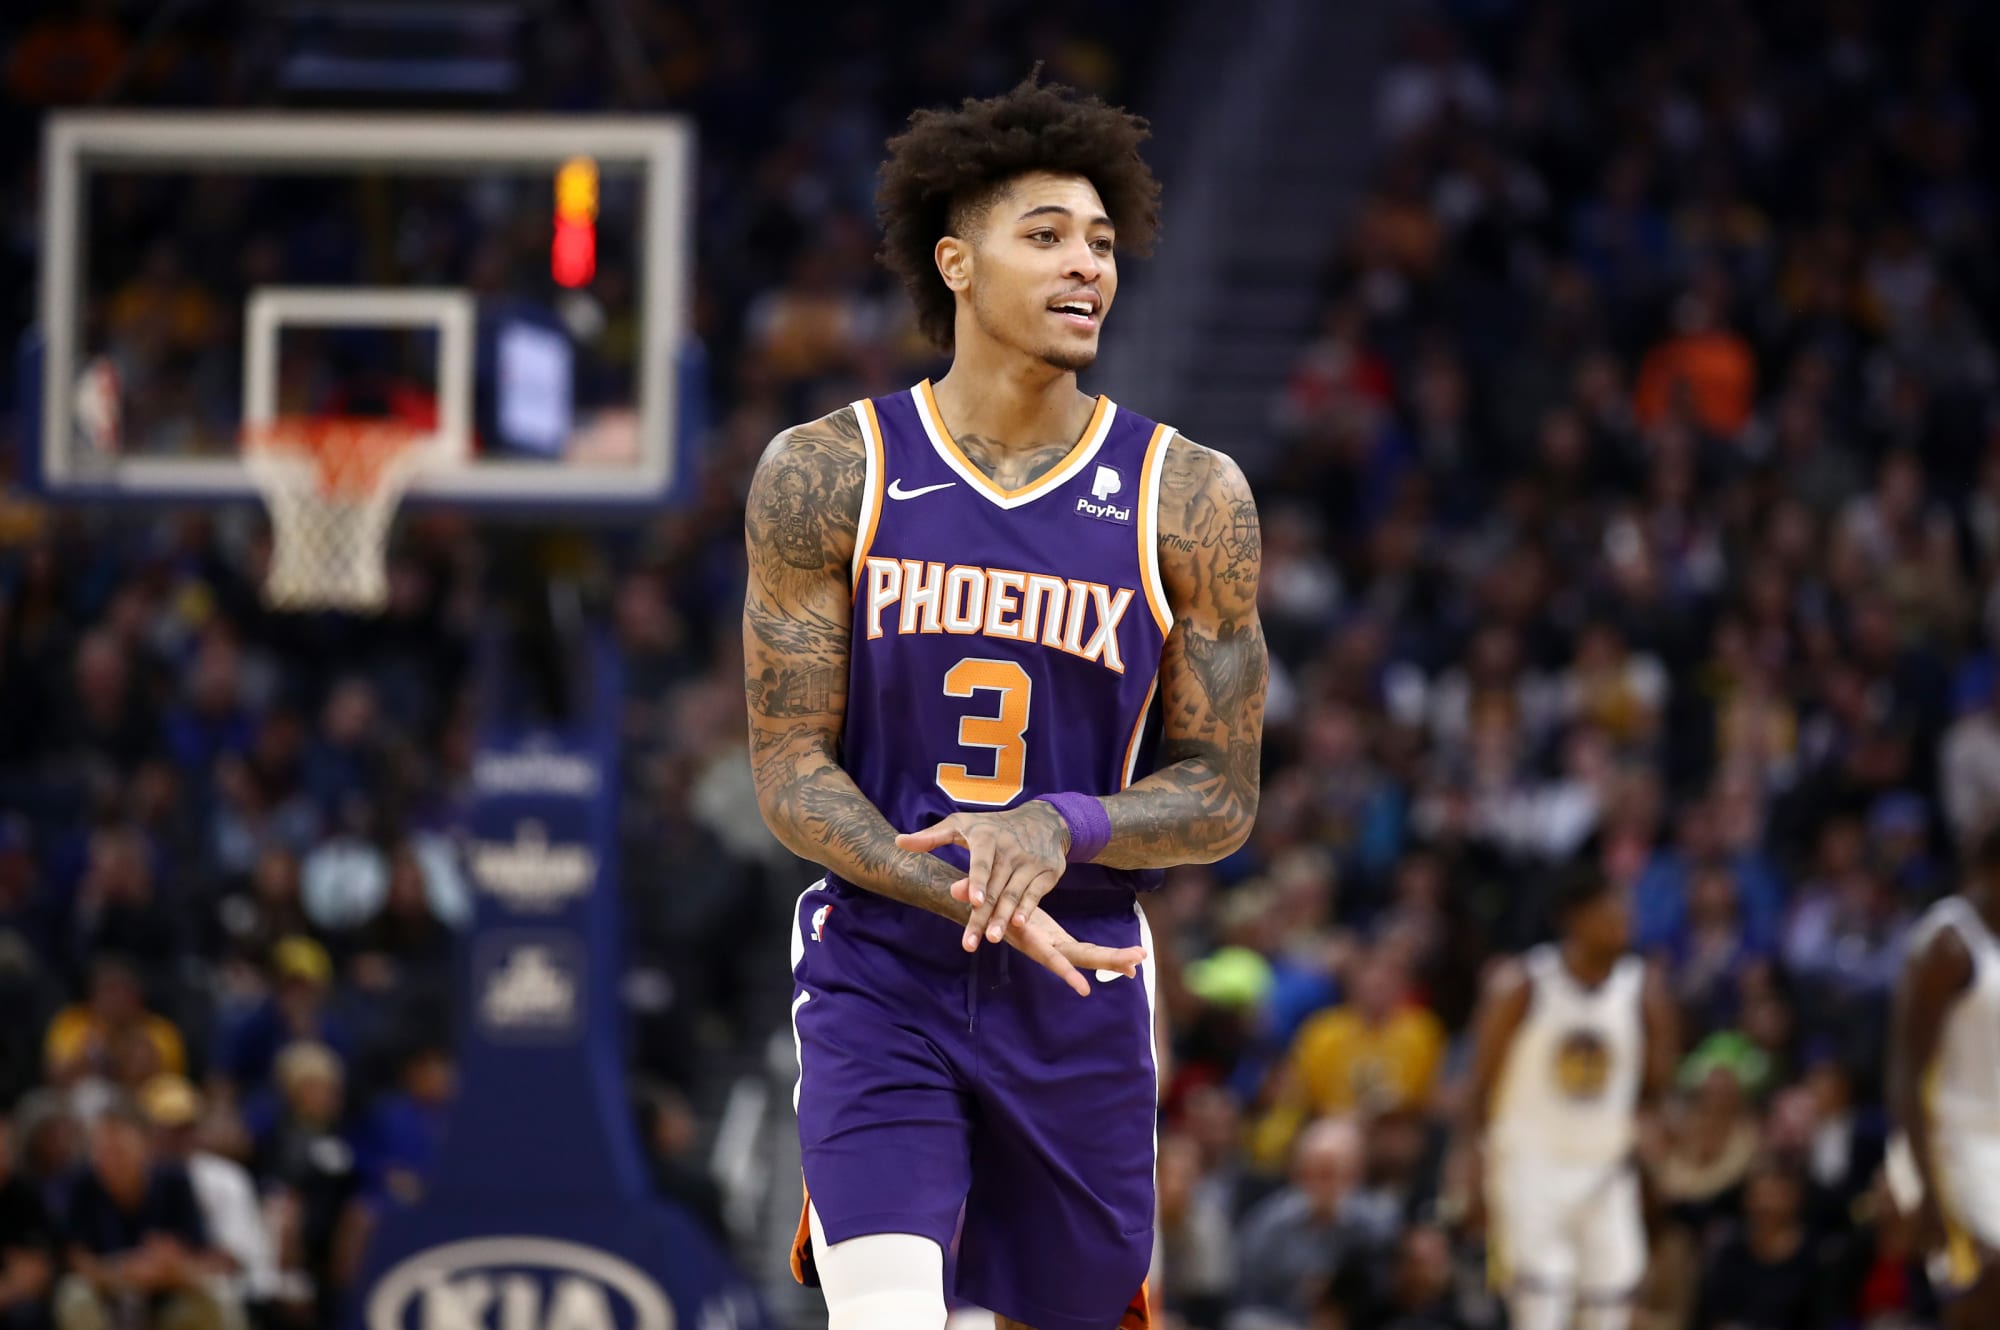 Phoenix Suns' Kelly Oubre Jr. out for remainder of NBA season